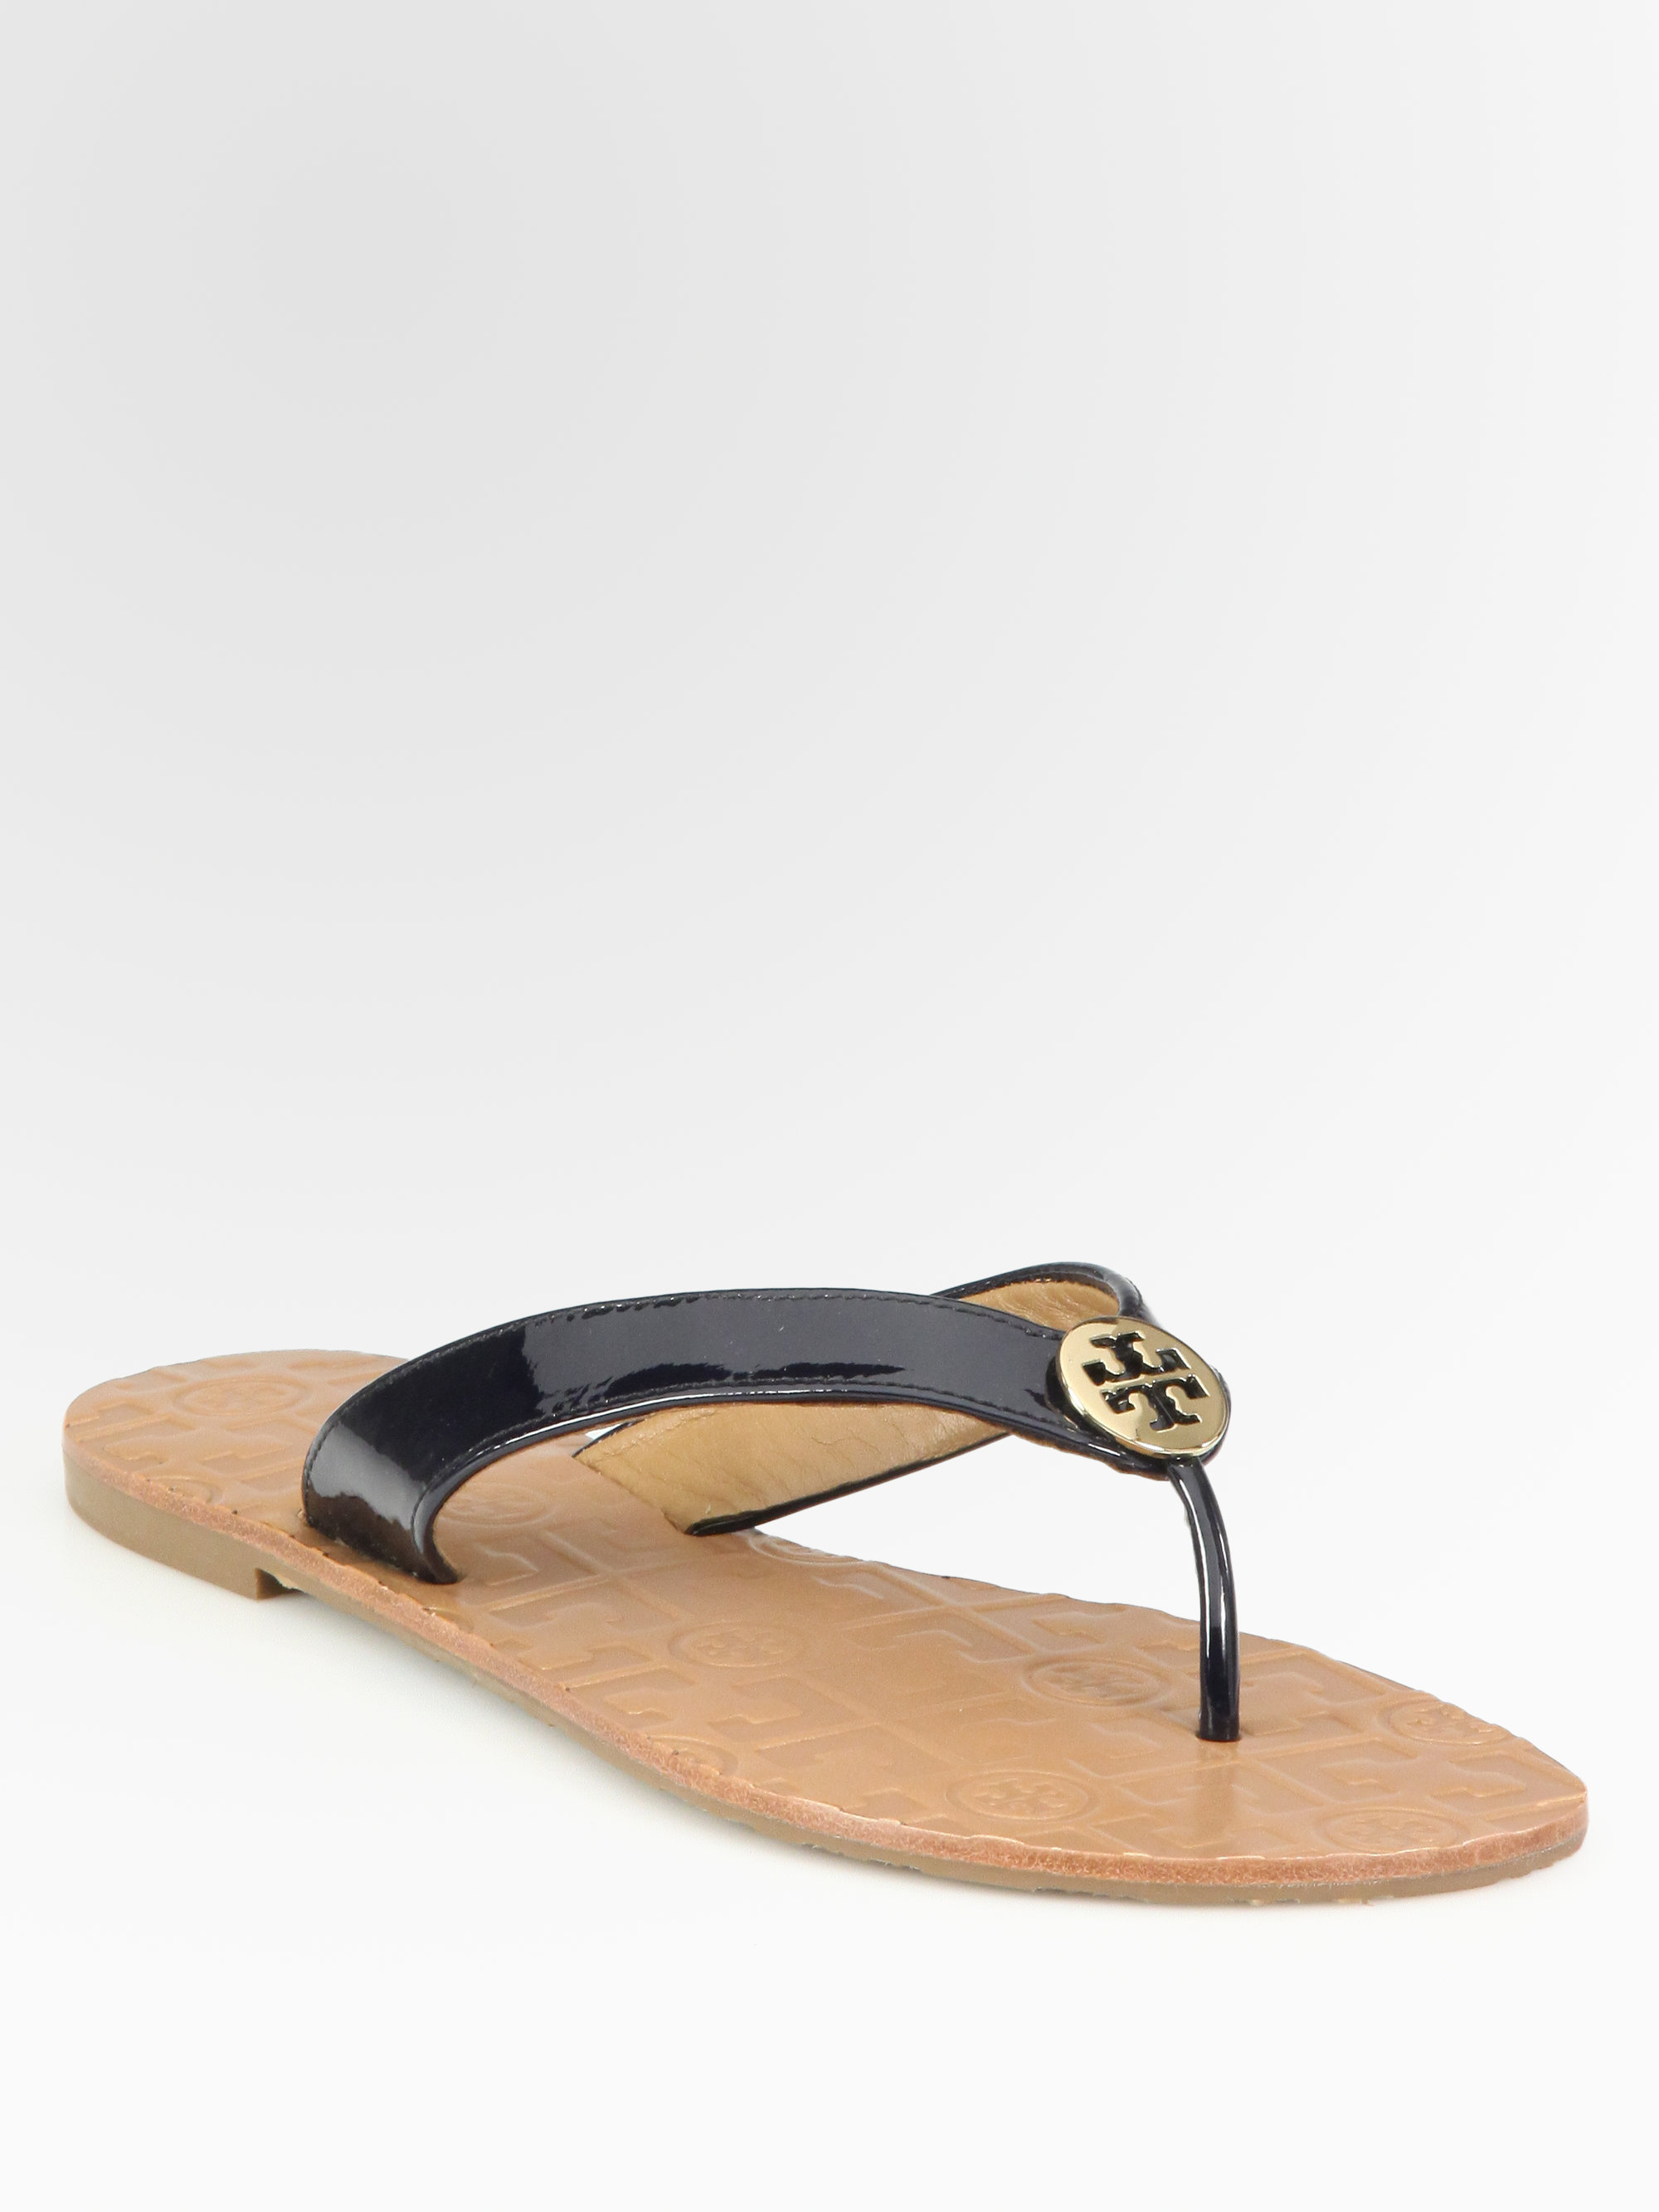 Tory Burch Thora Patent Leather Flip Flops in (tory navy) | Lyst